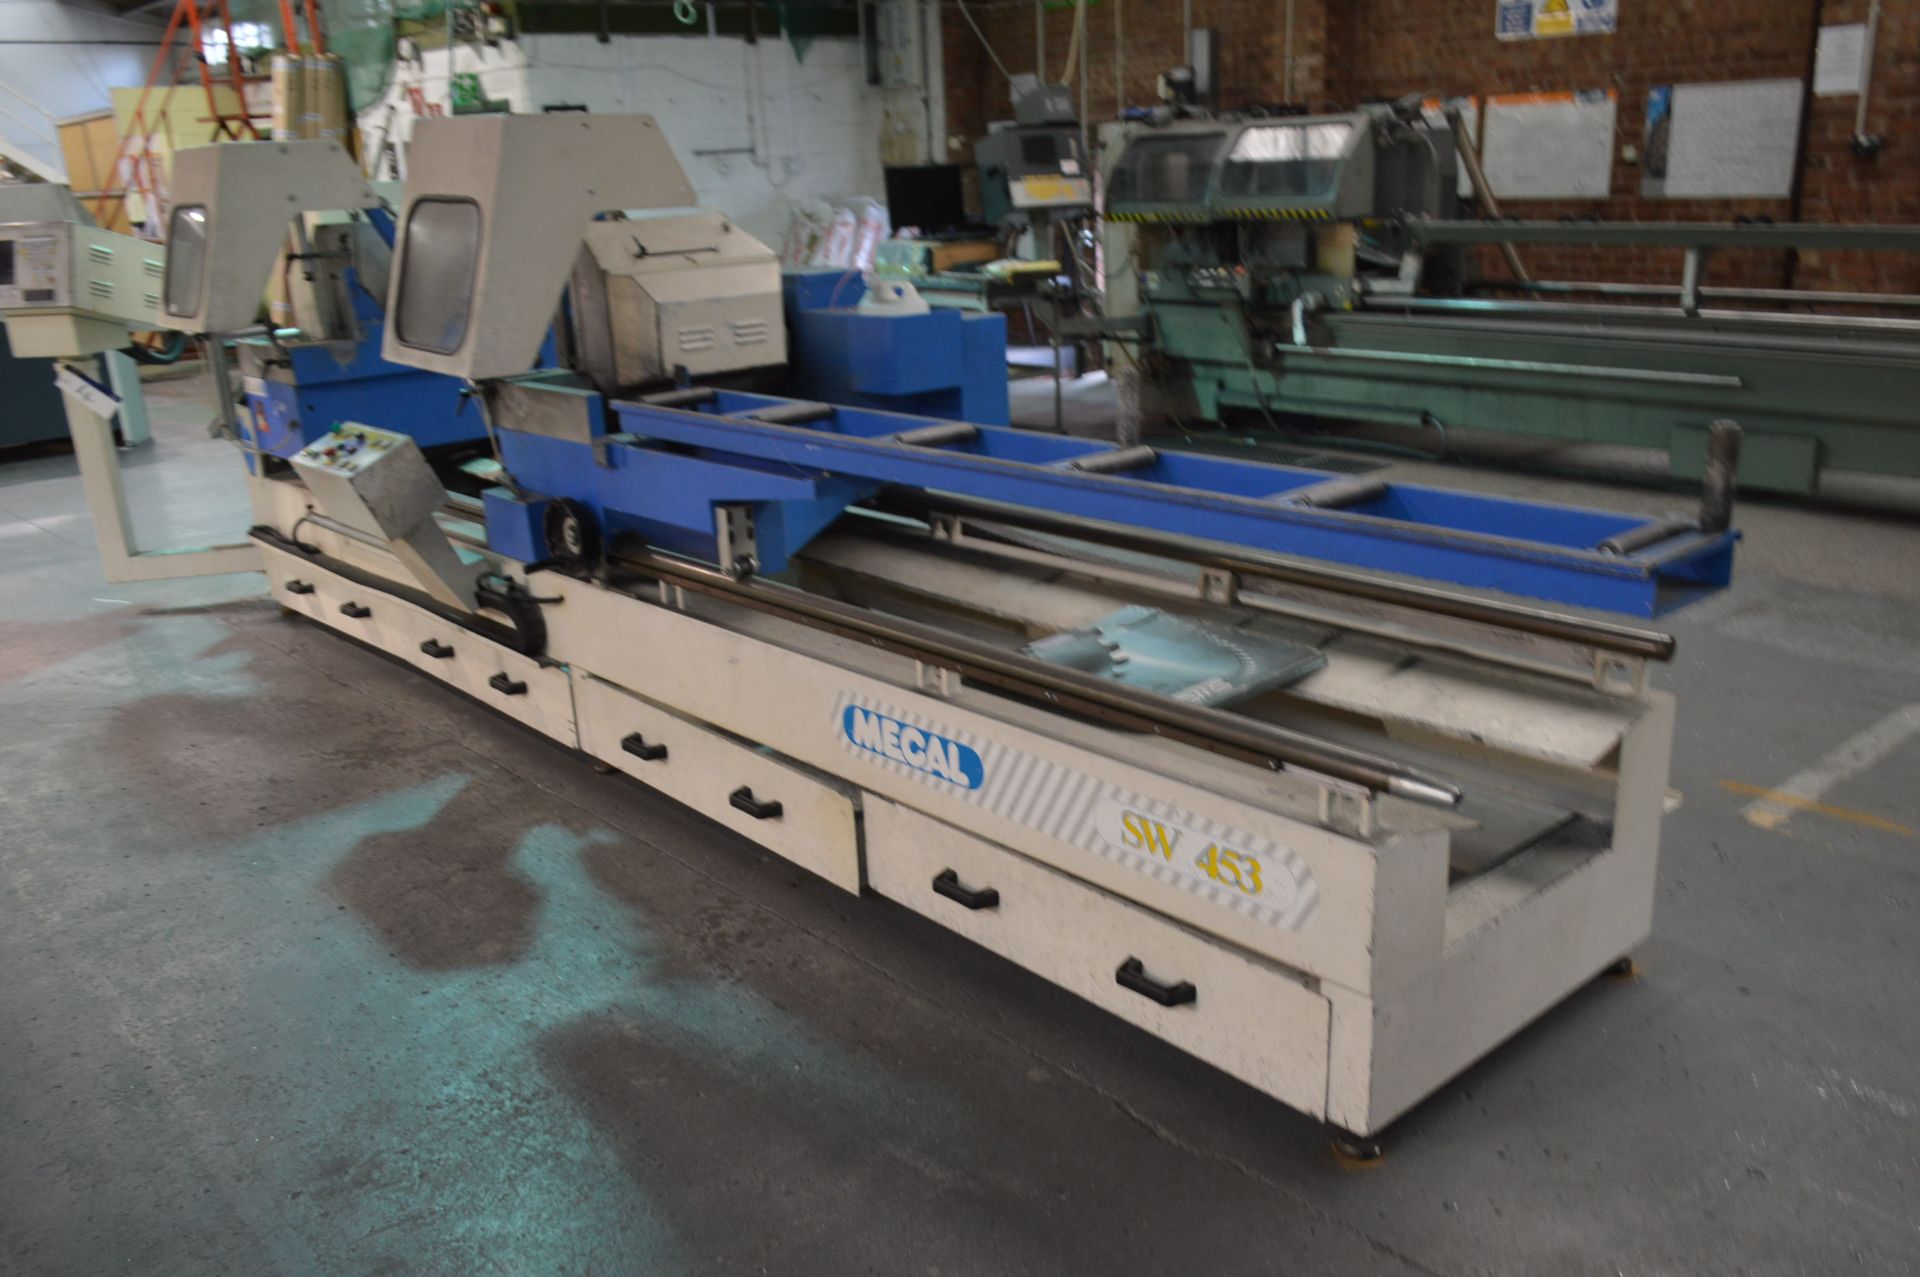 Addison/ Mecal Argus SW 453 CNC DOUBLE HEAD SAW, s - Image 2 of 8